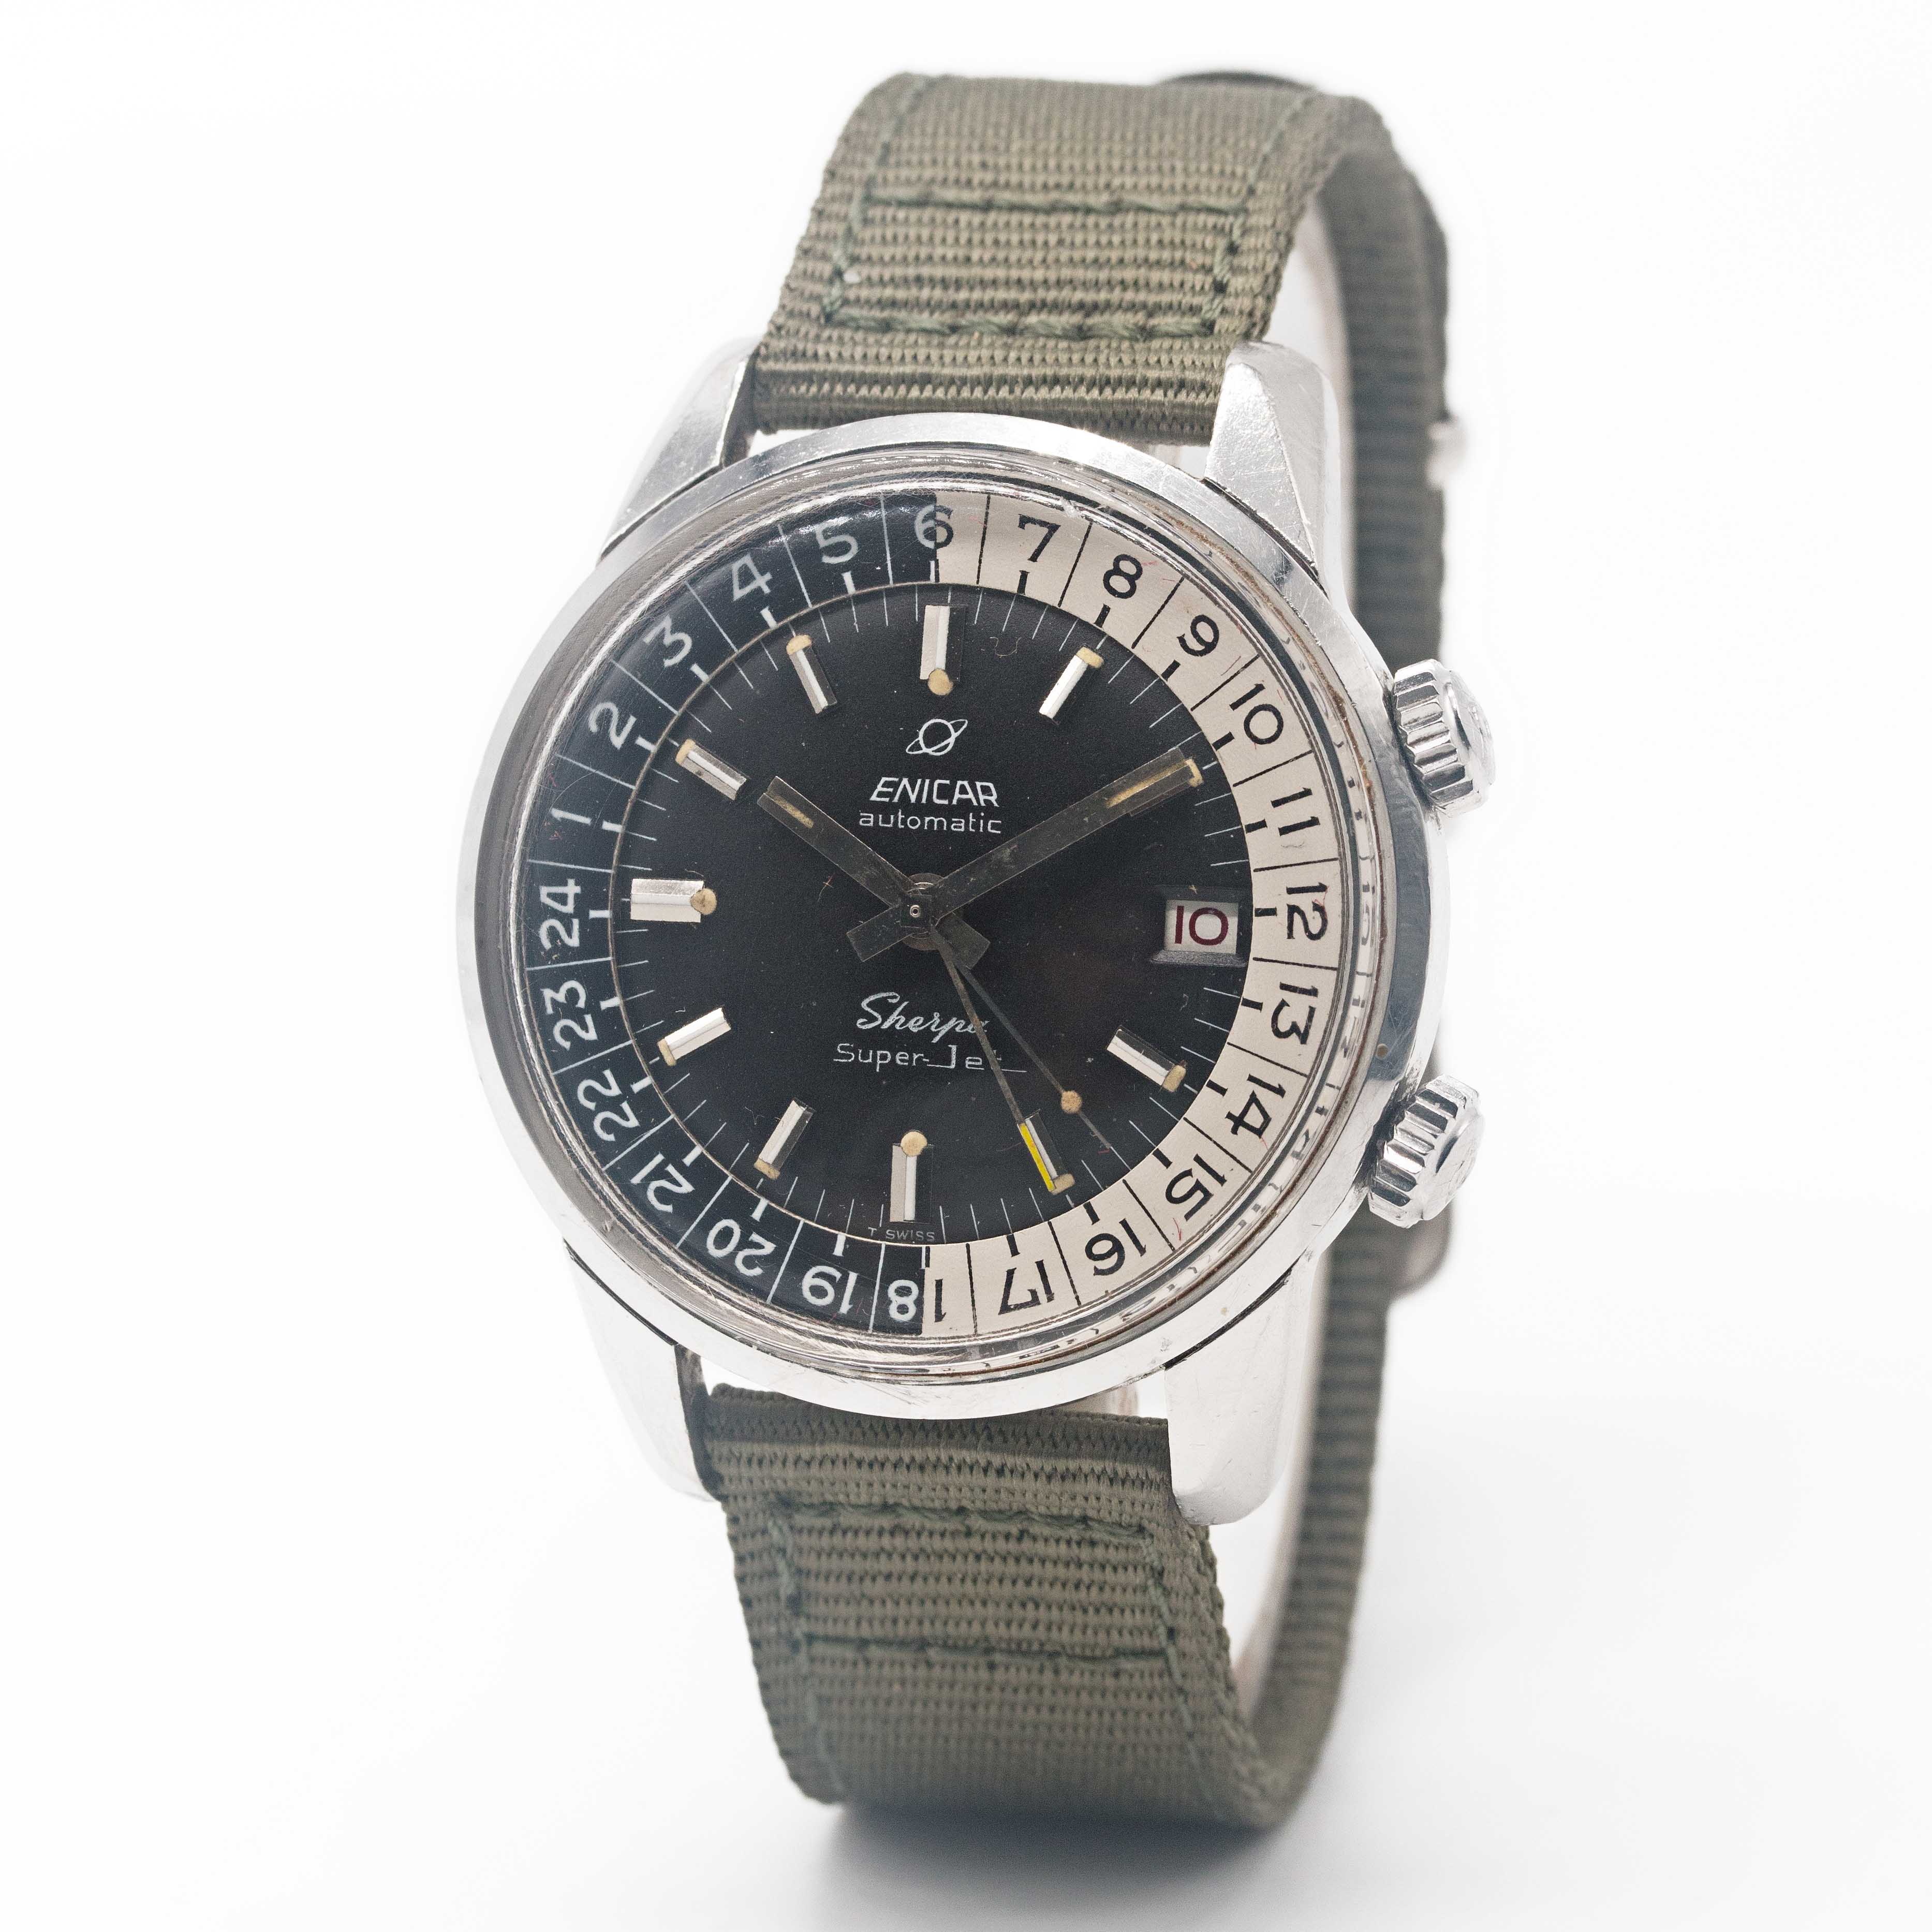 A GENTLEMAN'S STAINLESS STEEL ENICAR SHERPA SUPER JET GMT WRIST WATCH CIRCA 1960s, REF. 146/003 WITH - Image 4 of 8